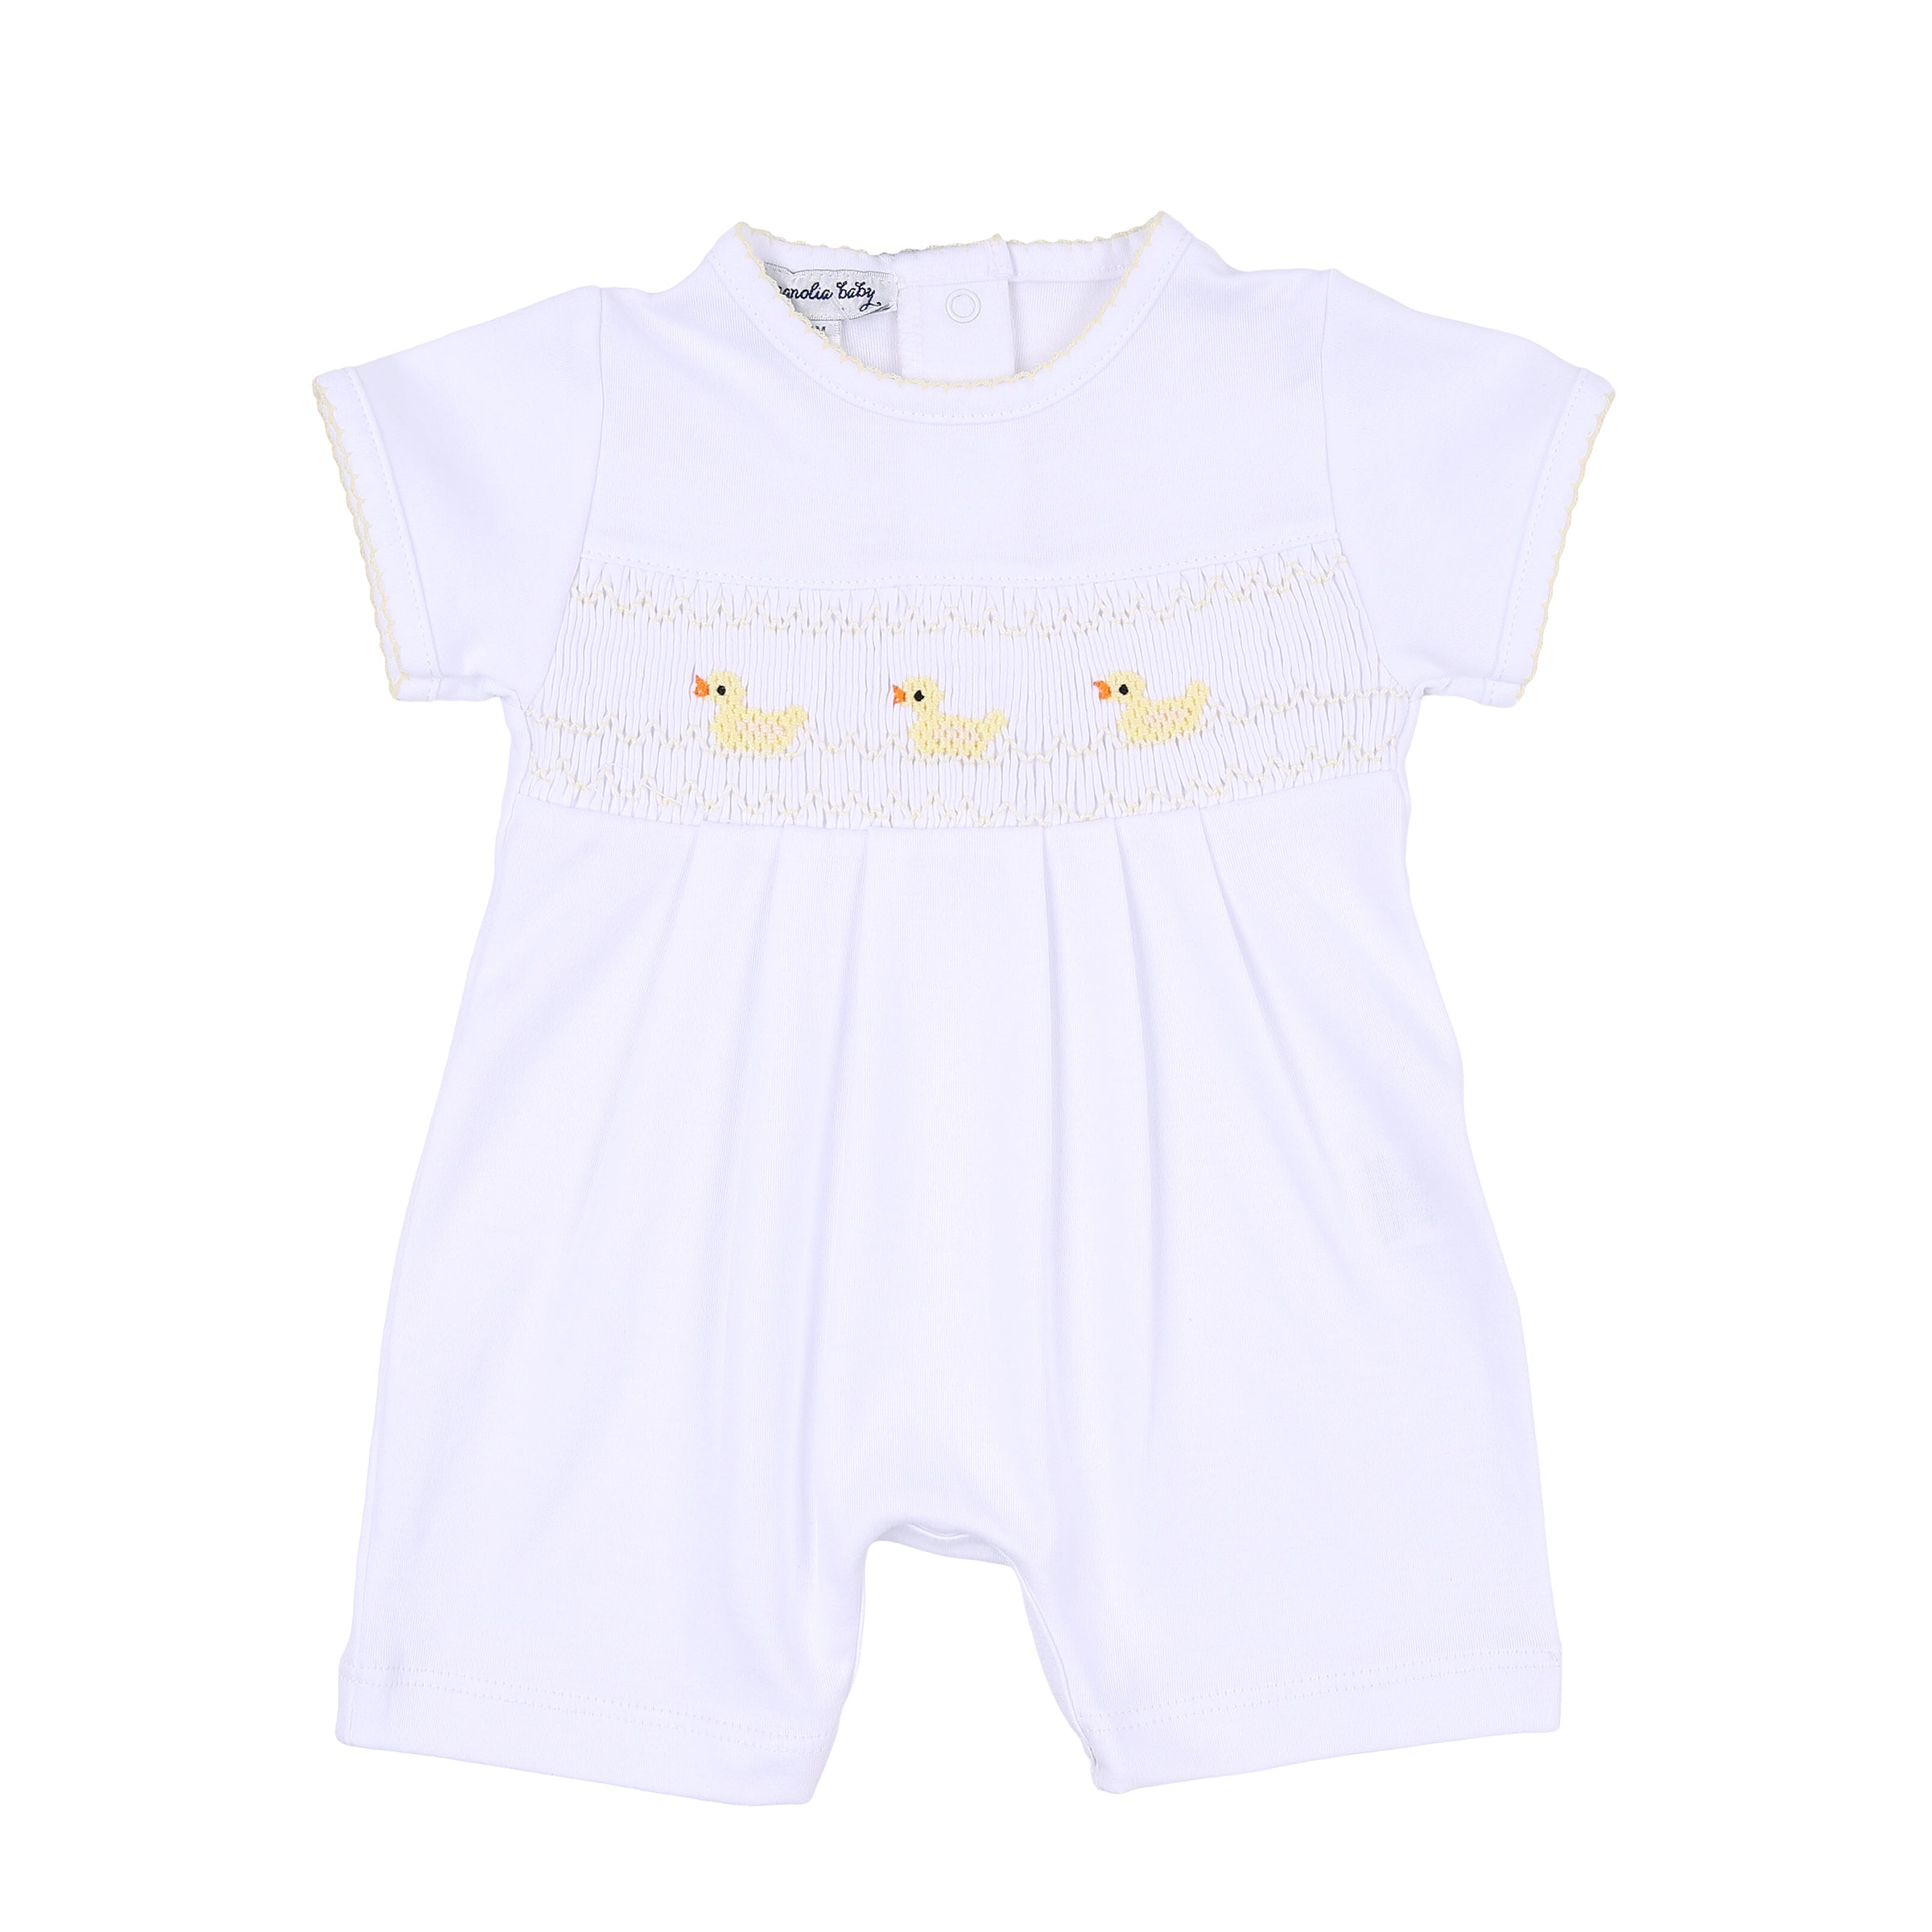 Just Ducky Classics Smocked Short Playsuit